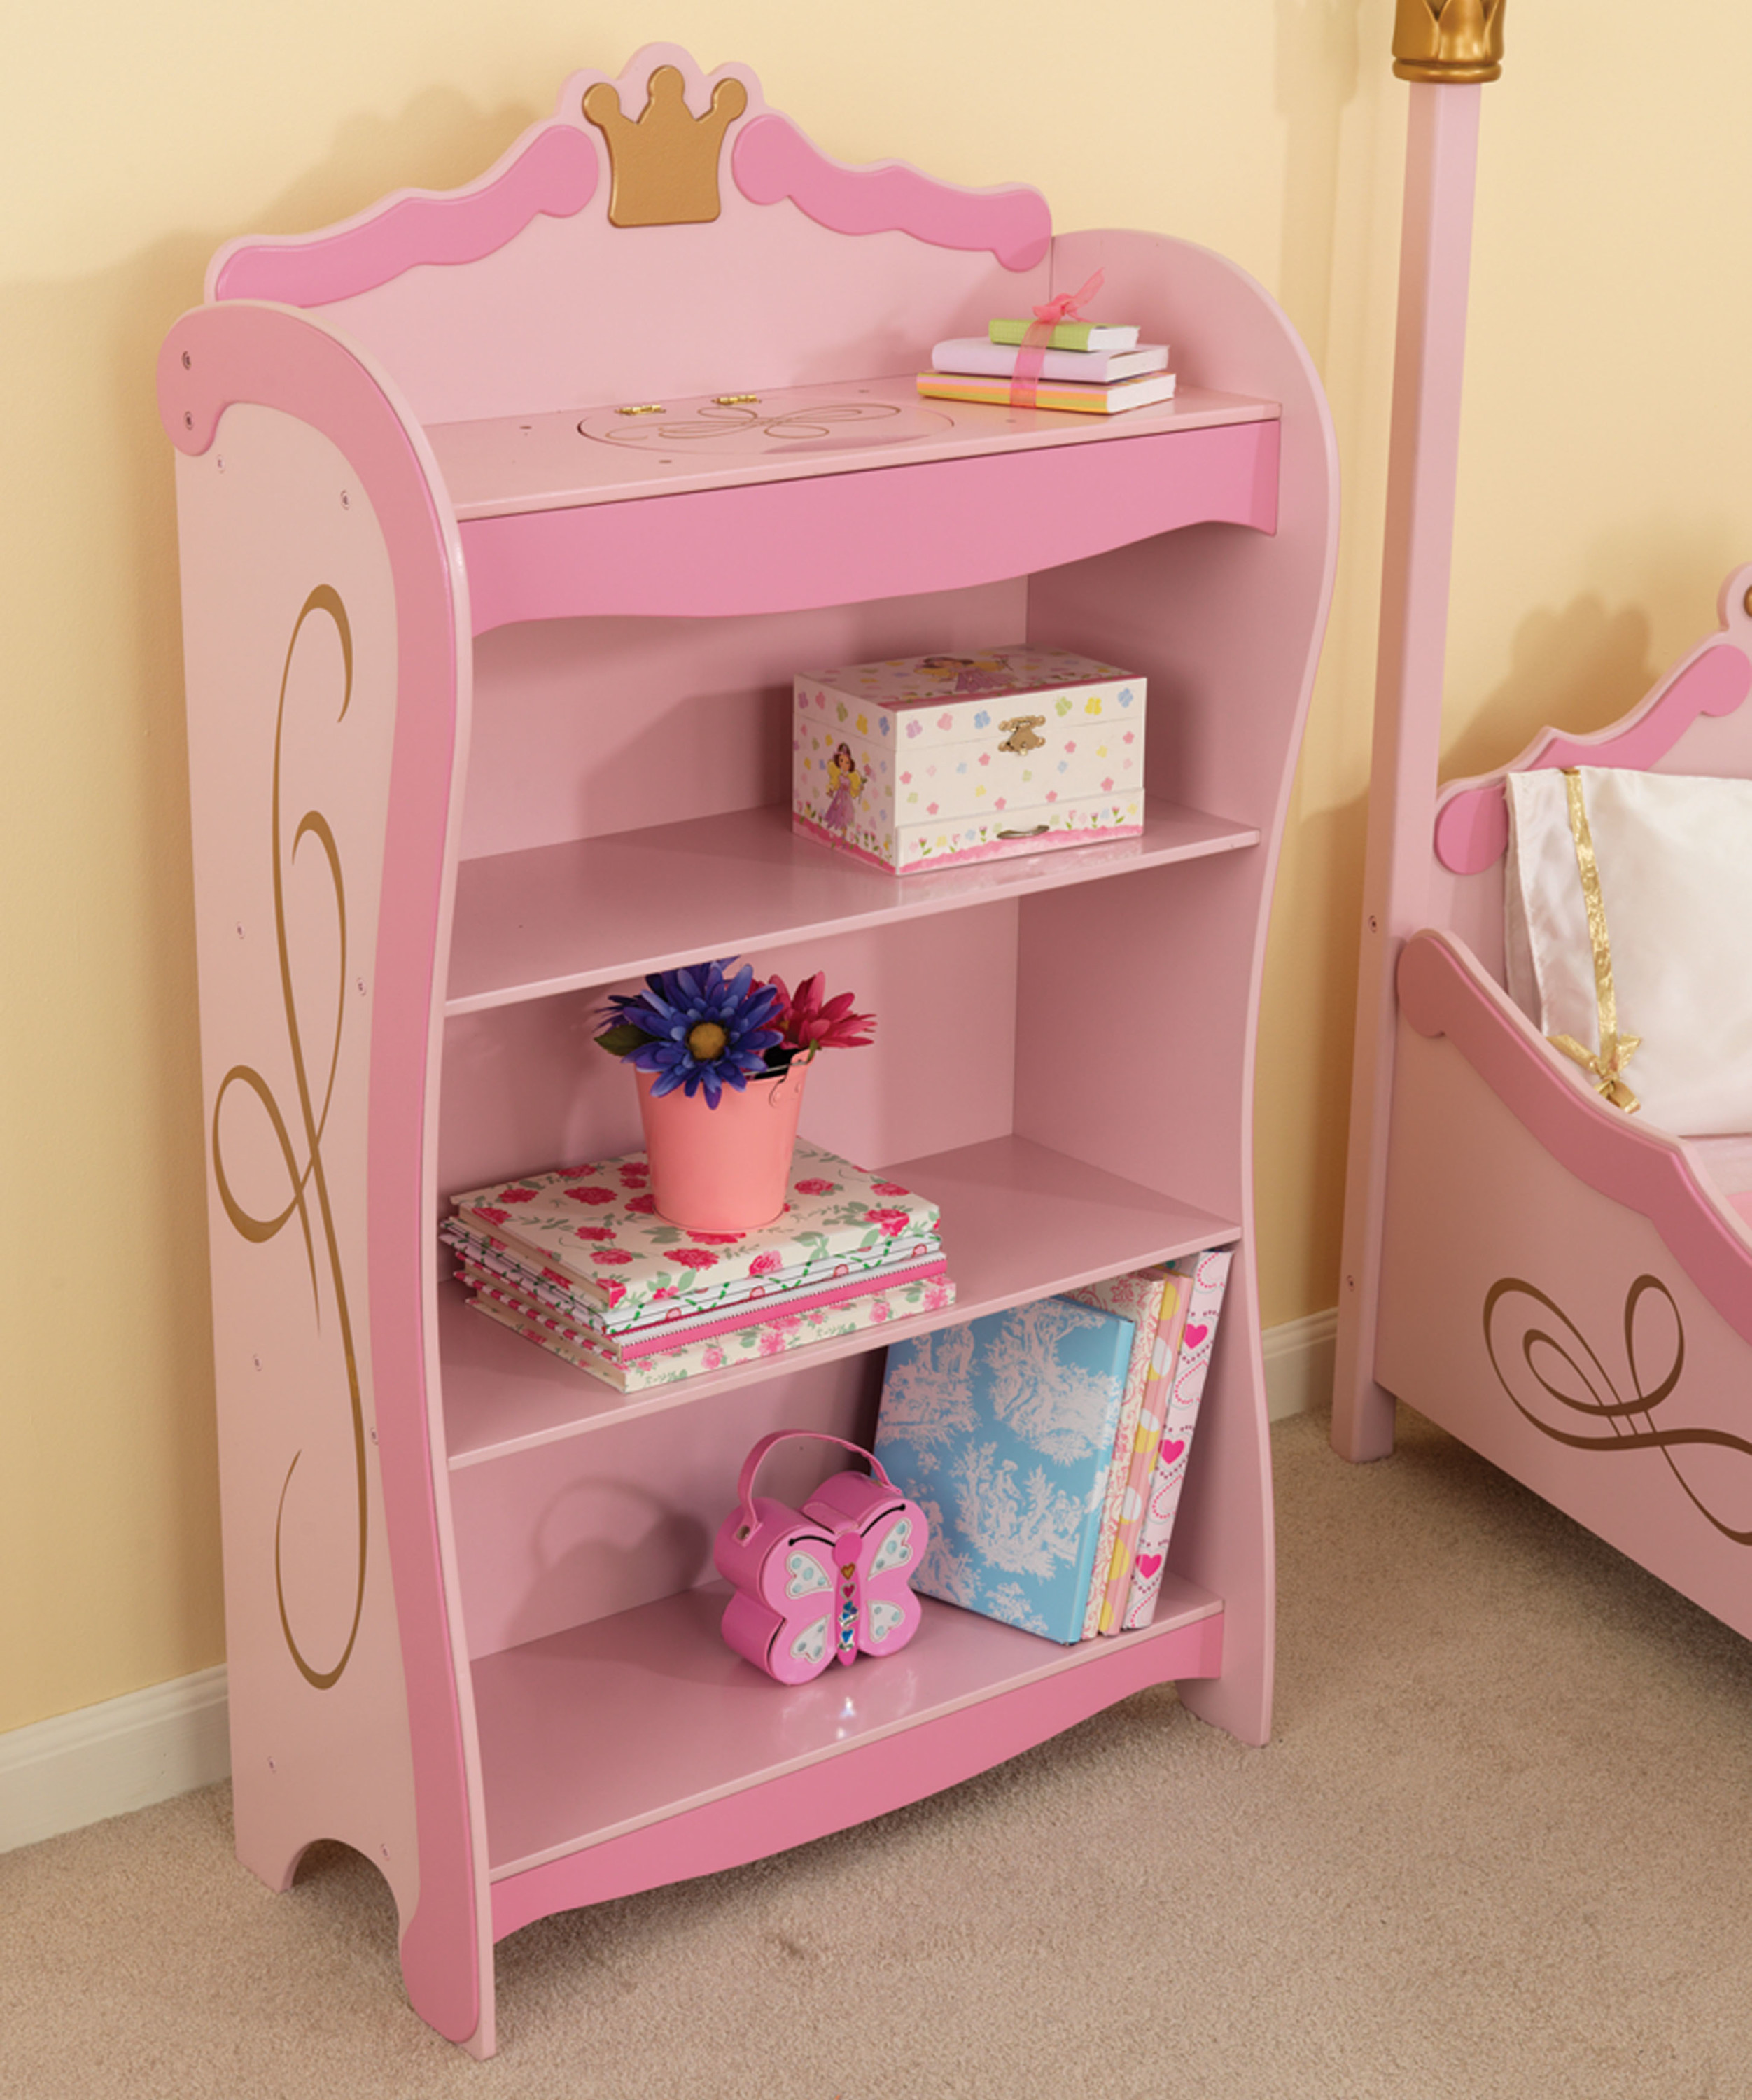 KidKraft Wooden Princess Bookcase with Crown Accent, Shelves and Hidden Storage - Pink - image 2 of 2